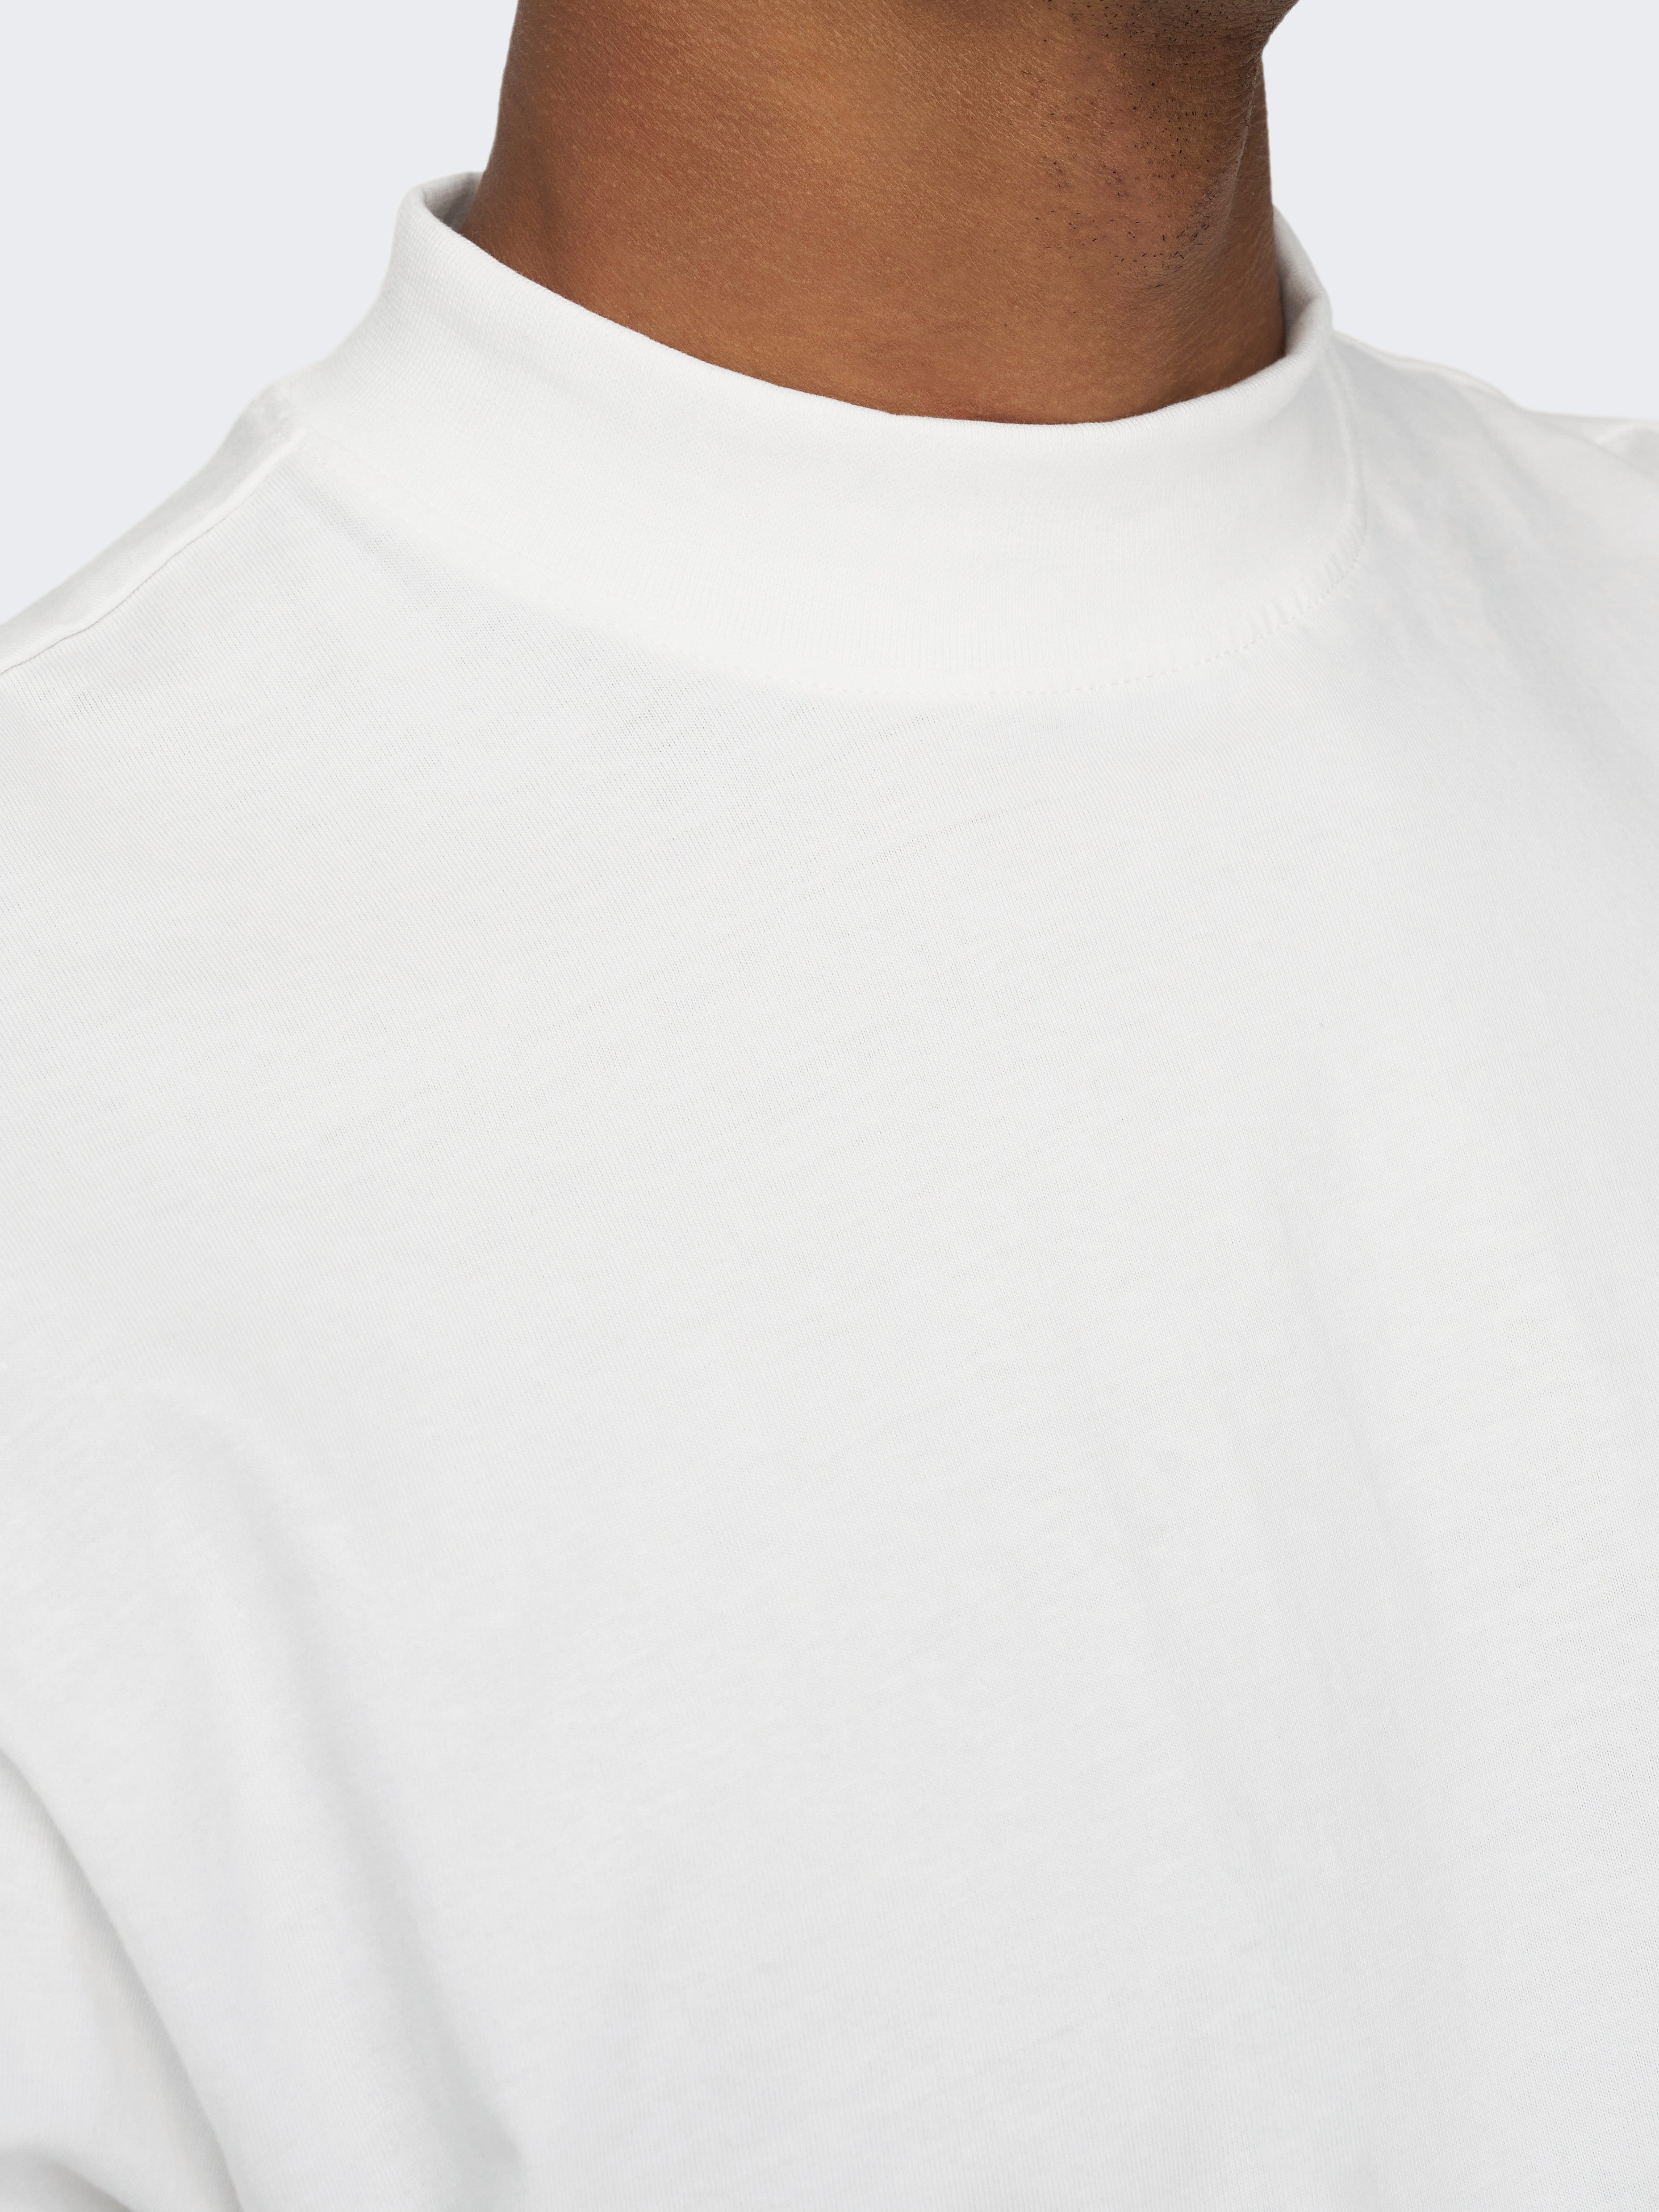 Relaxed Fit Mock neck T-Shirt | White | ONLY & SONS®